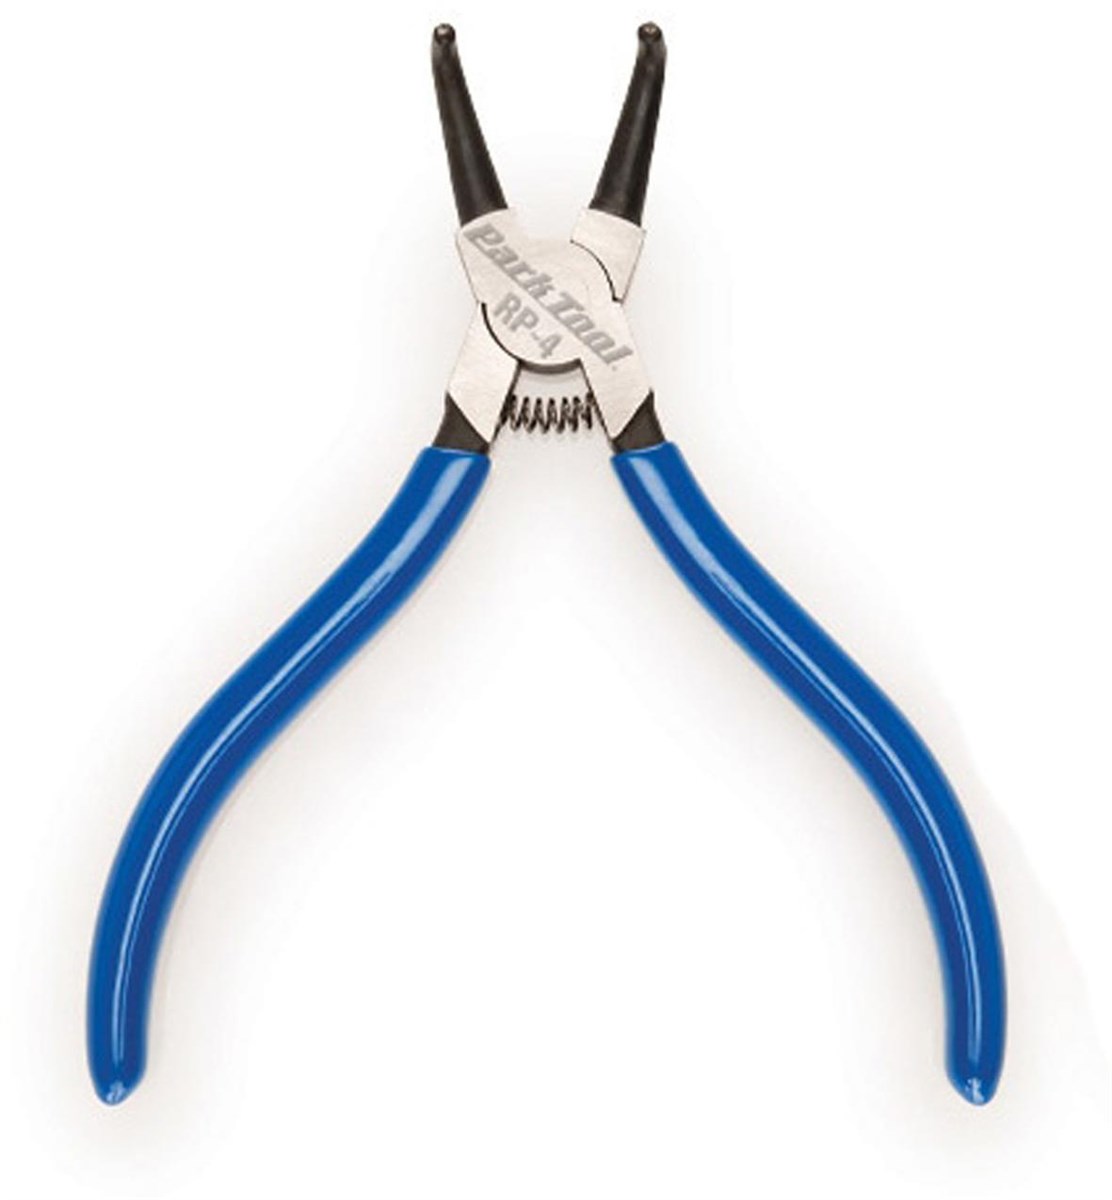 Park Tool RP-4 - Snap Ring (Circlip) Pliers - 1.7mm Bent Internal product image